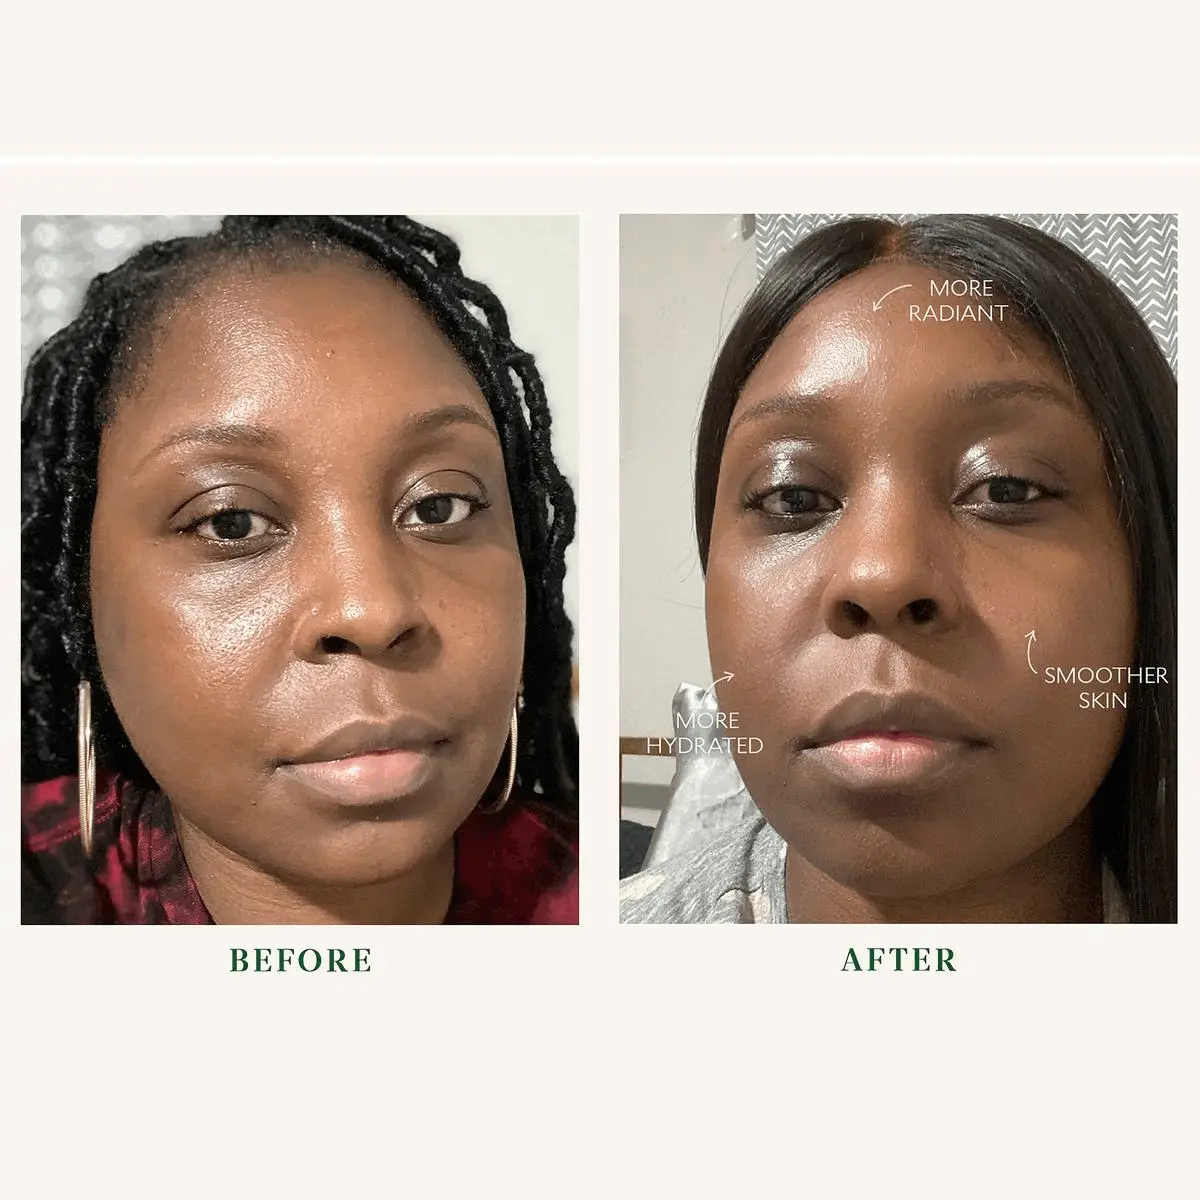 Image 1, before and after, more radiant, more hydrated and smoother skin. Image 2, before and after, improved tone, brighter under eyes, more radiant, more hydrated. Image 3, more radiant, less redness, smoother skin